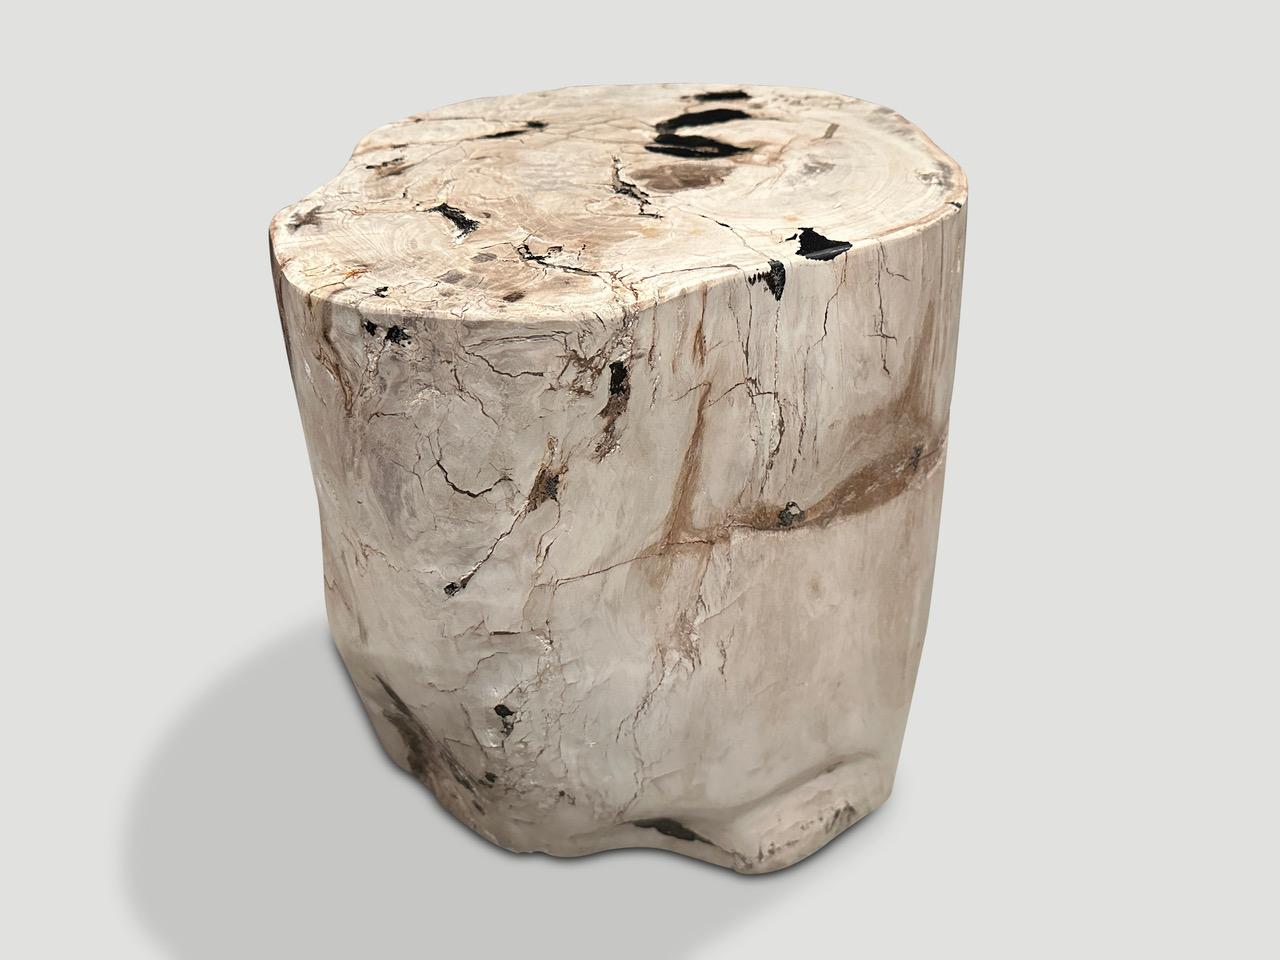 Neutral tones on this high quality petrified wood side table. It’s fascinating how Mother Nature produces these stunning 40 million year old petrified teak logs with such contrasting colors and natural patterns throughout. Modern yet with so much